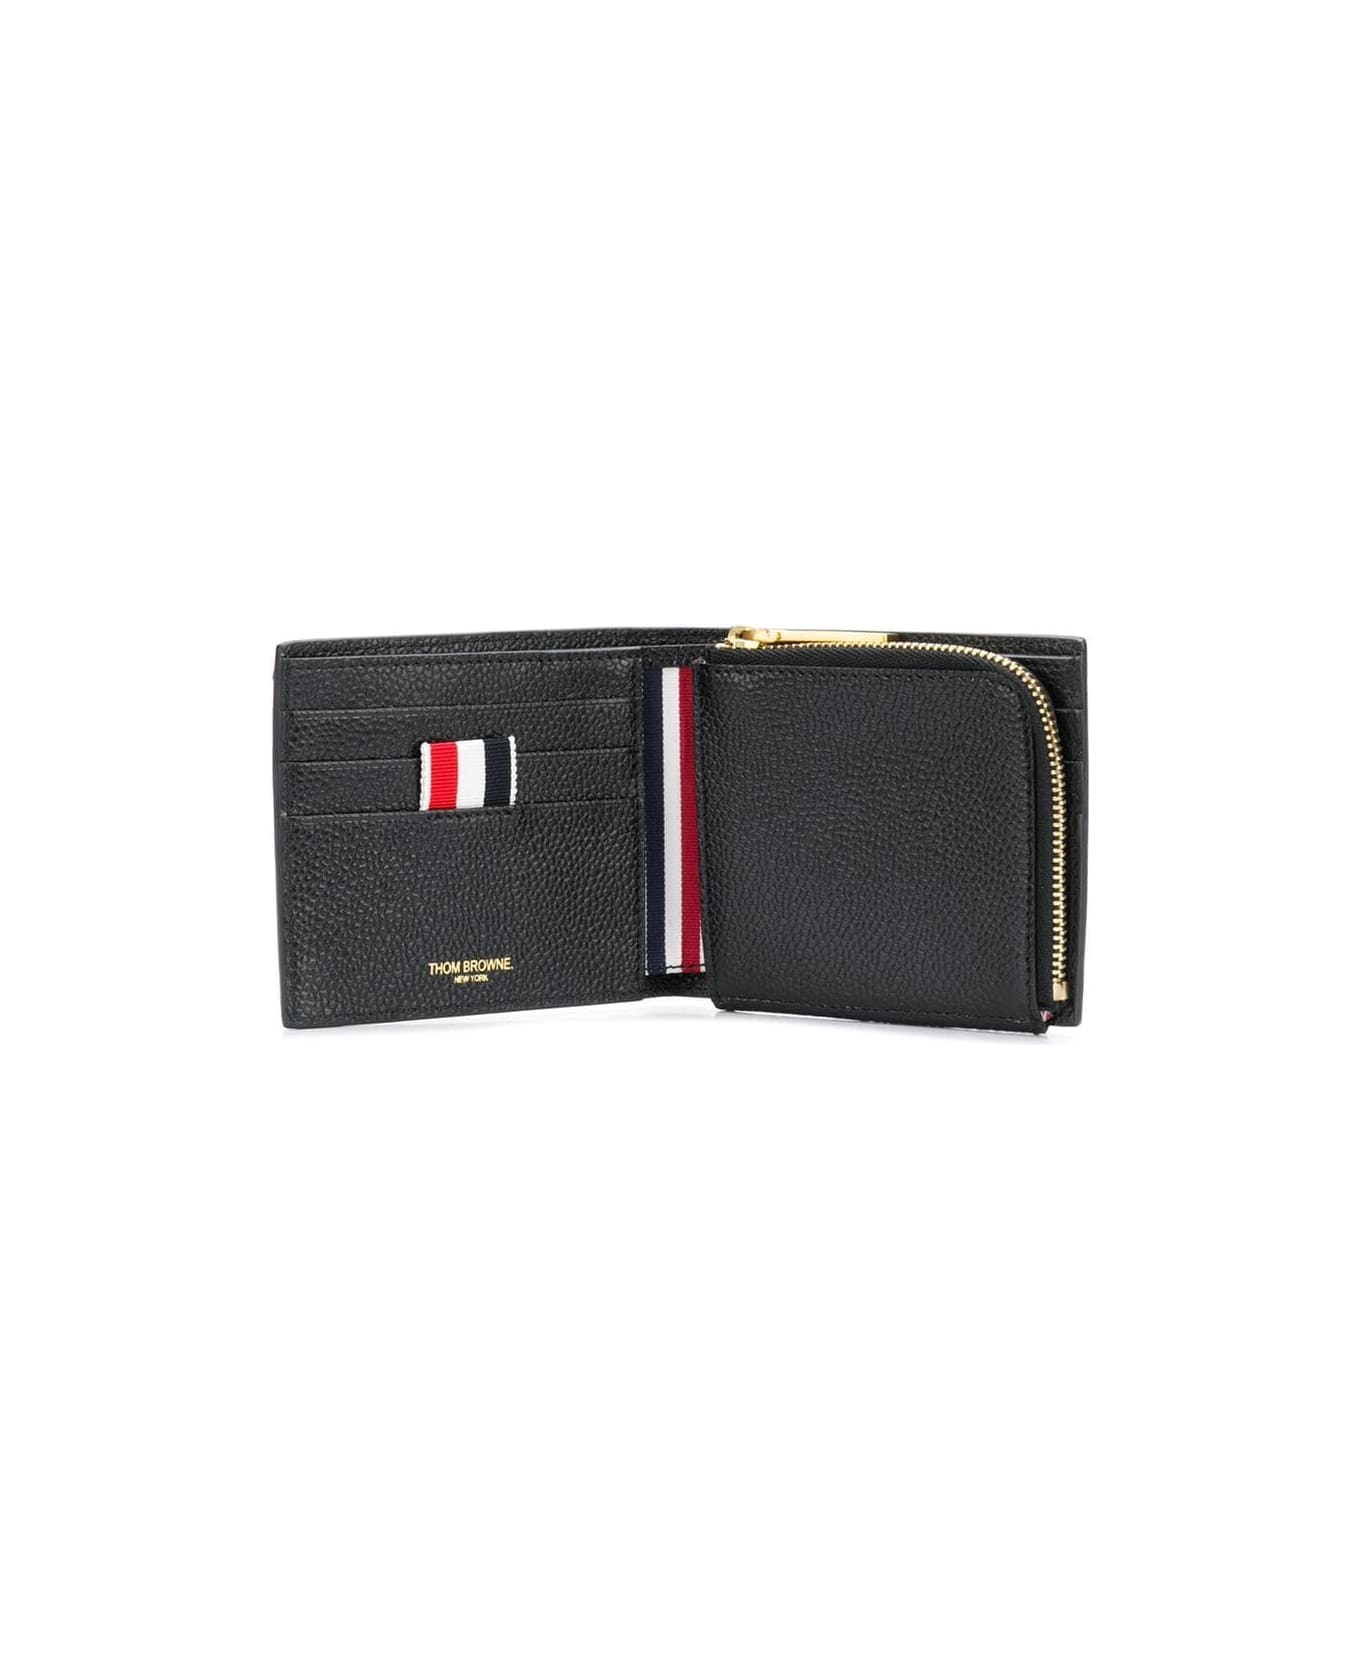 Thom Browne Billfold With Fold Out Coin Purse In Pebble Grain Leather - Black 財布